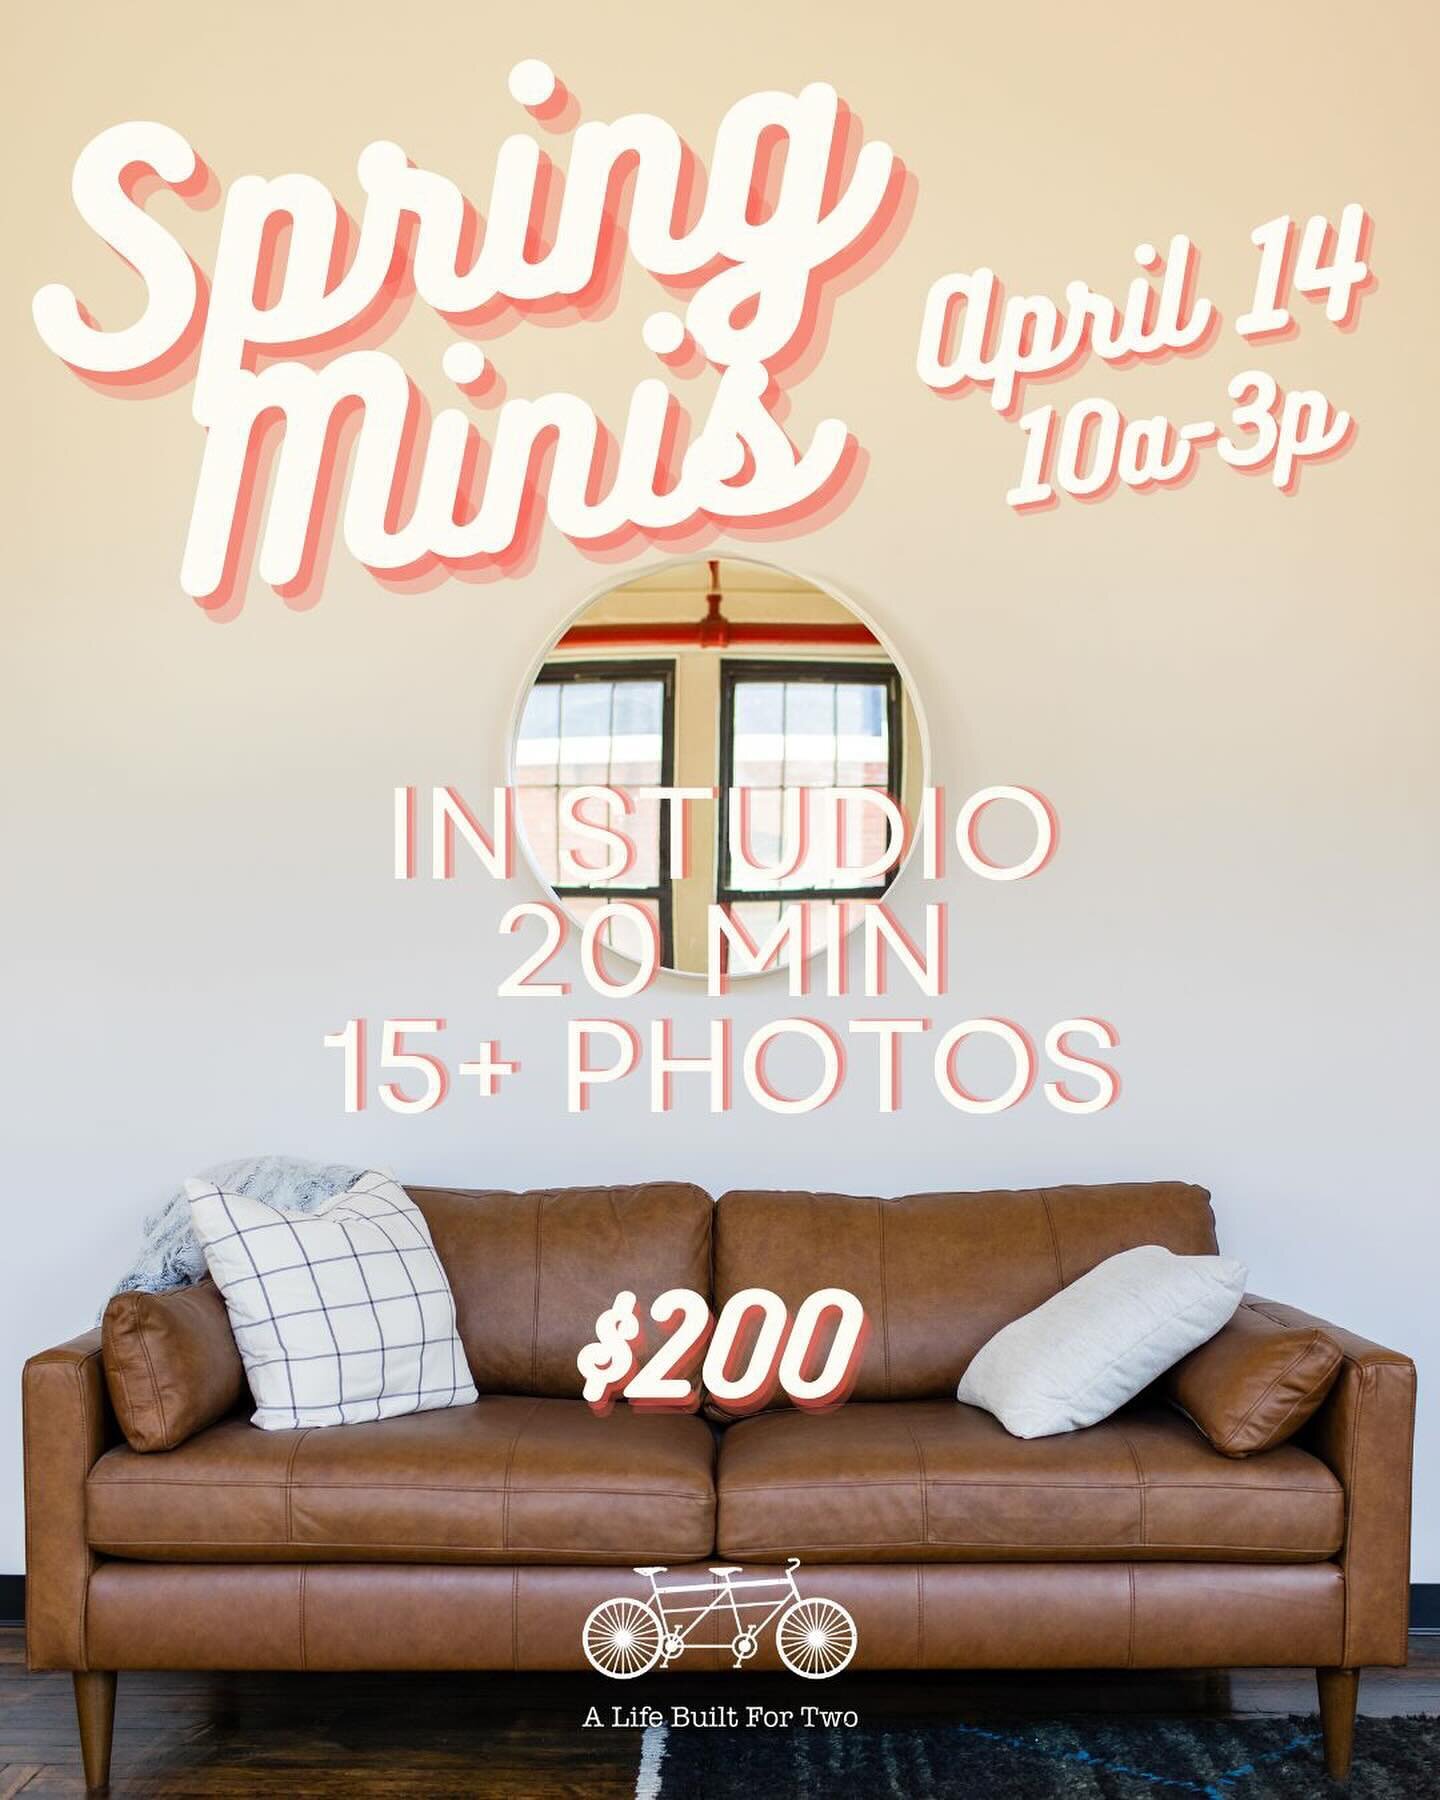 We&rsquo;re excited to announce that we are offering Spring Mini Sessions this year!

Save the date for April 14th at our studio at the @newyorkwireworks building!

Link in Bio to book your session